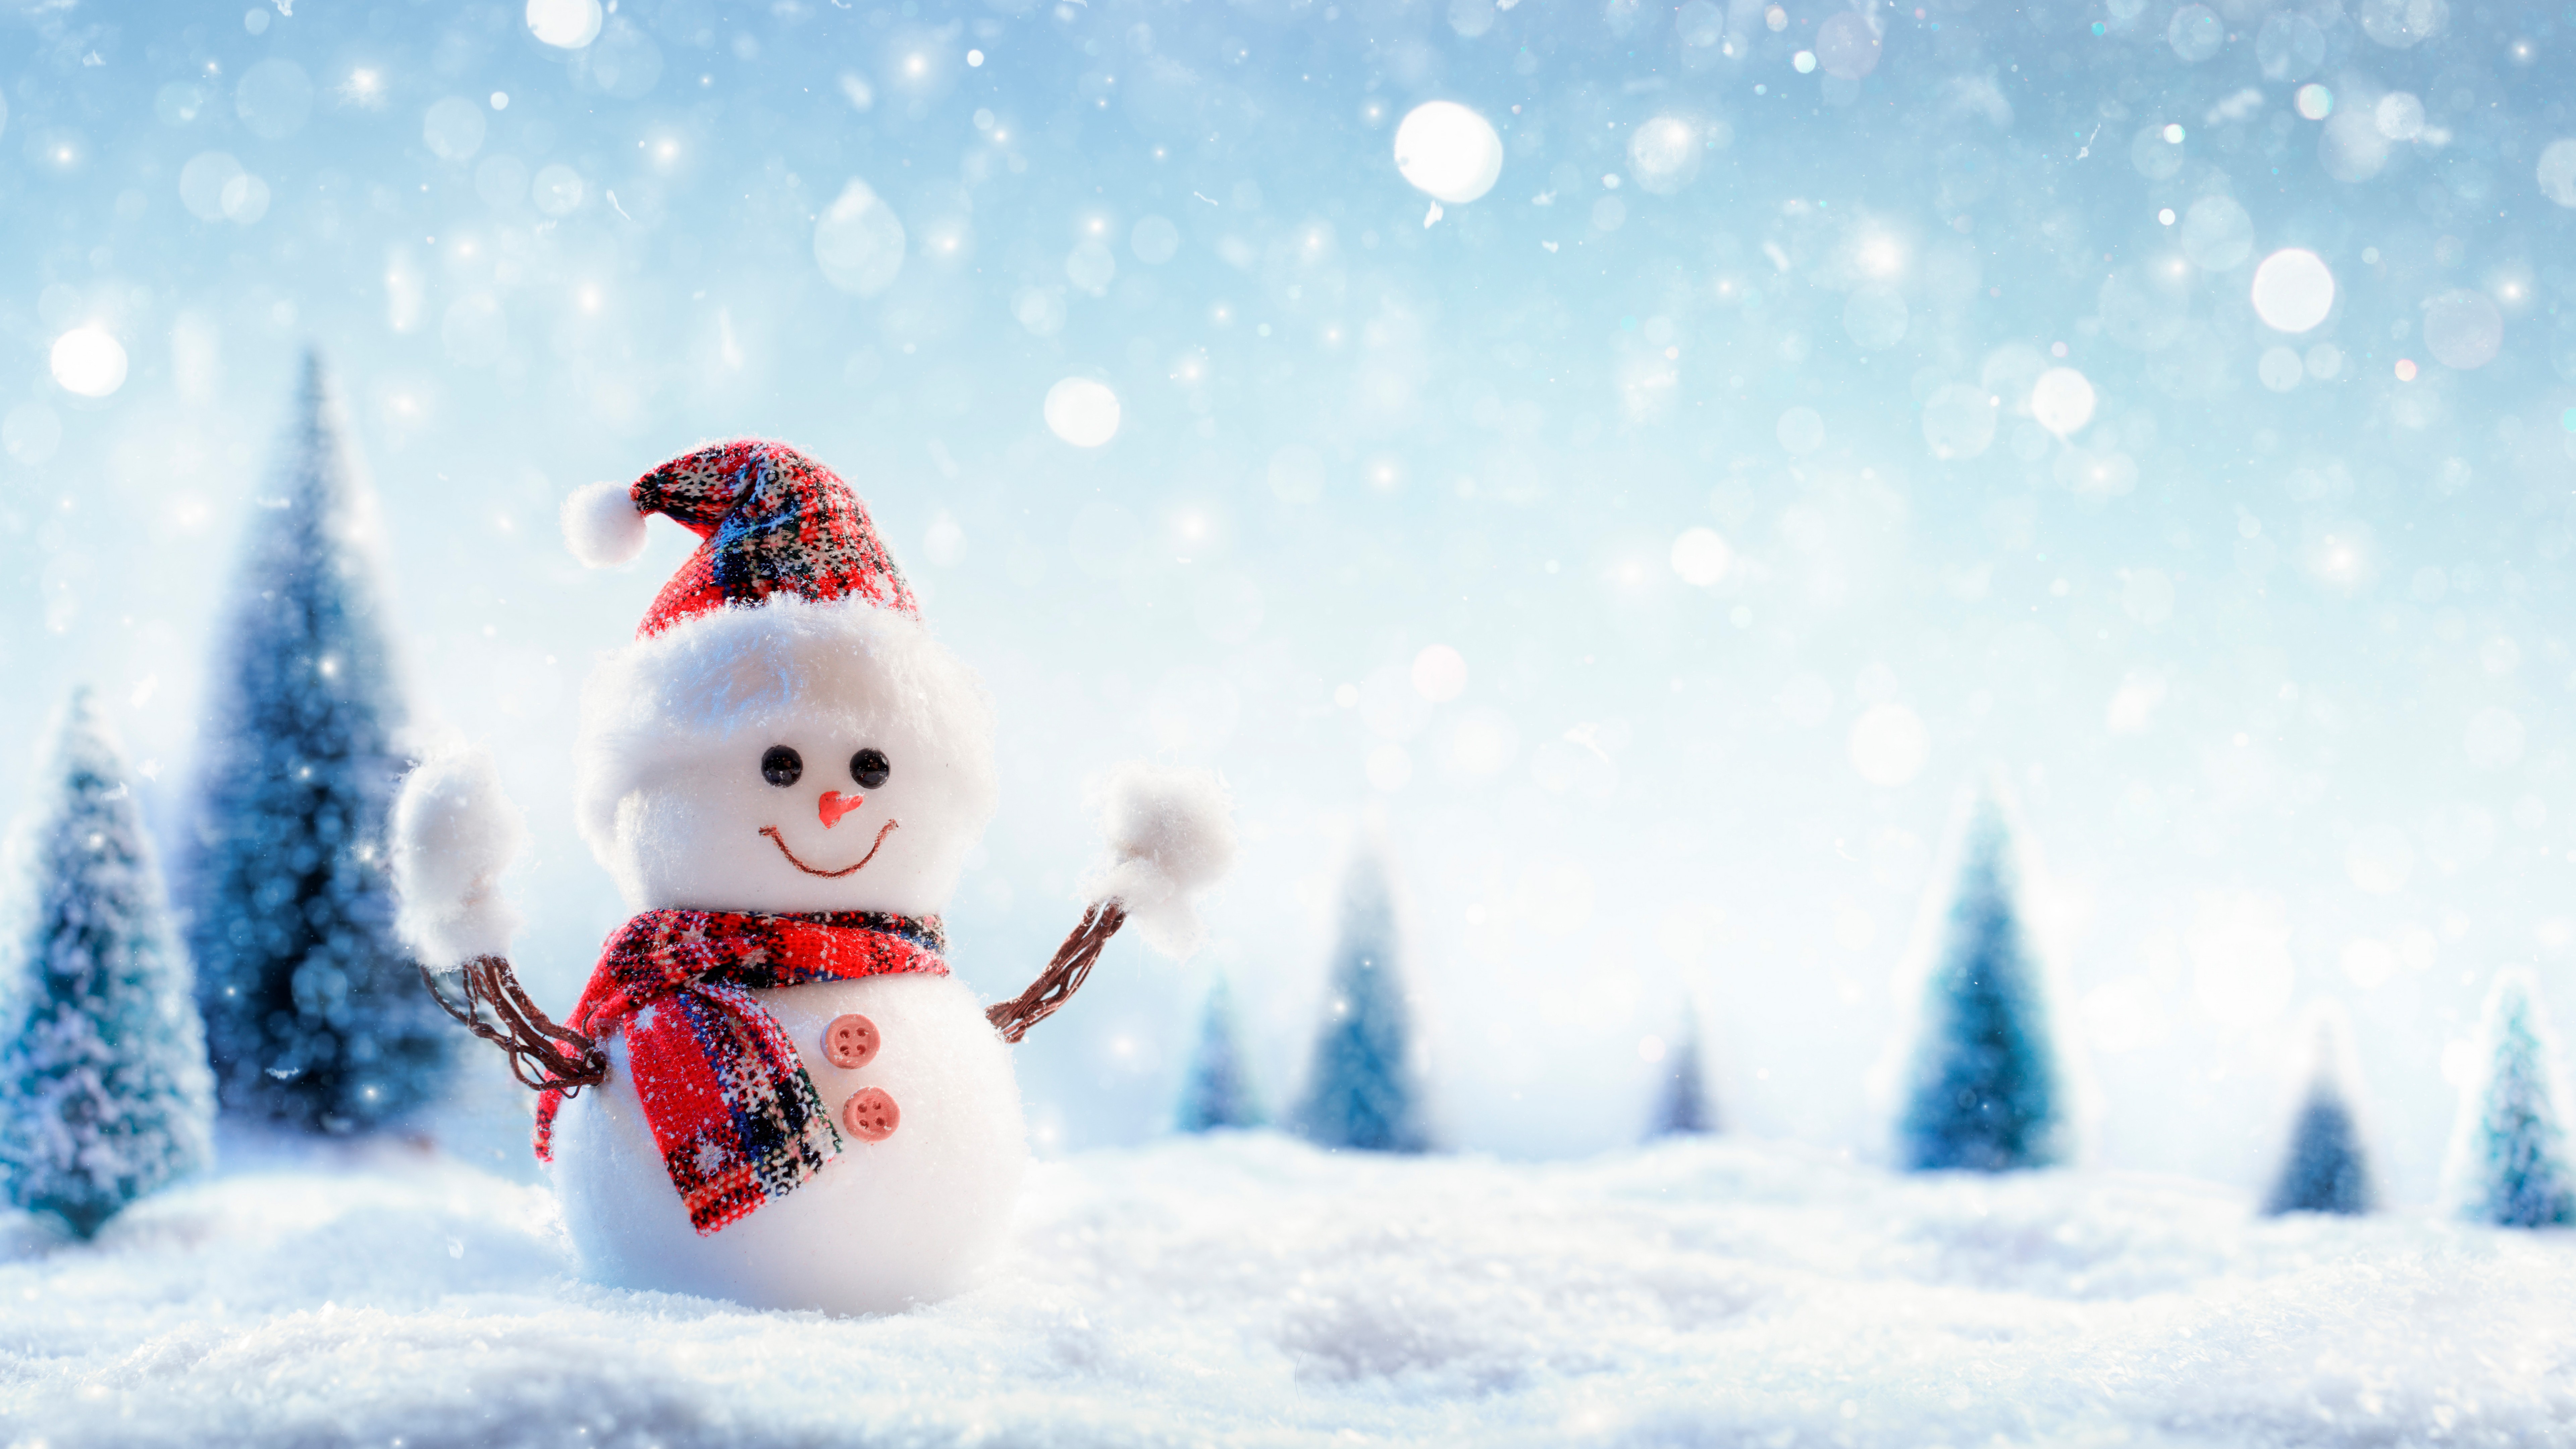 Wallpaper Christmas tree gifts snowman winter snow starry night  5120x2880 UHD 5K Picture Image